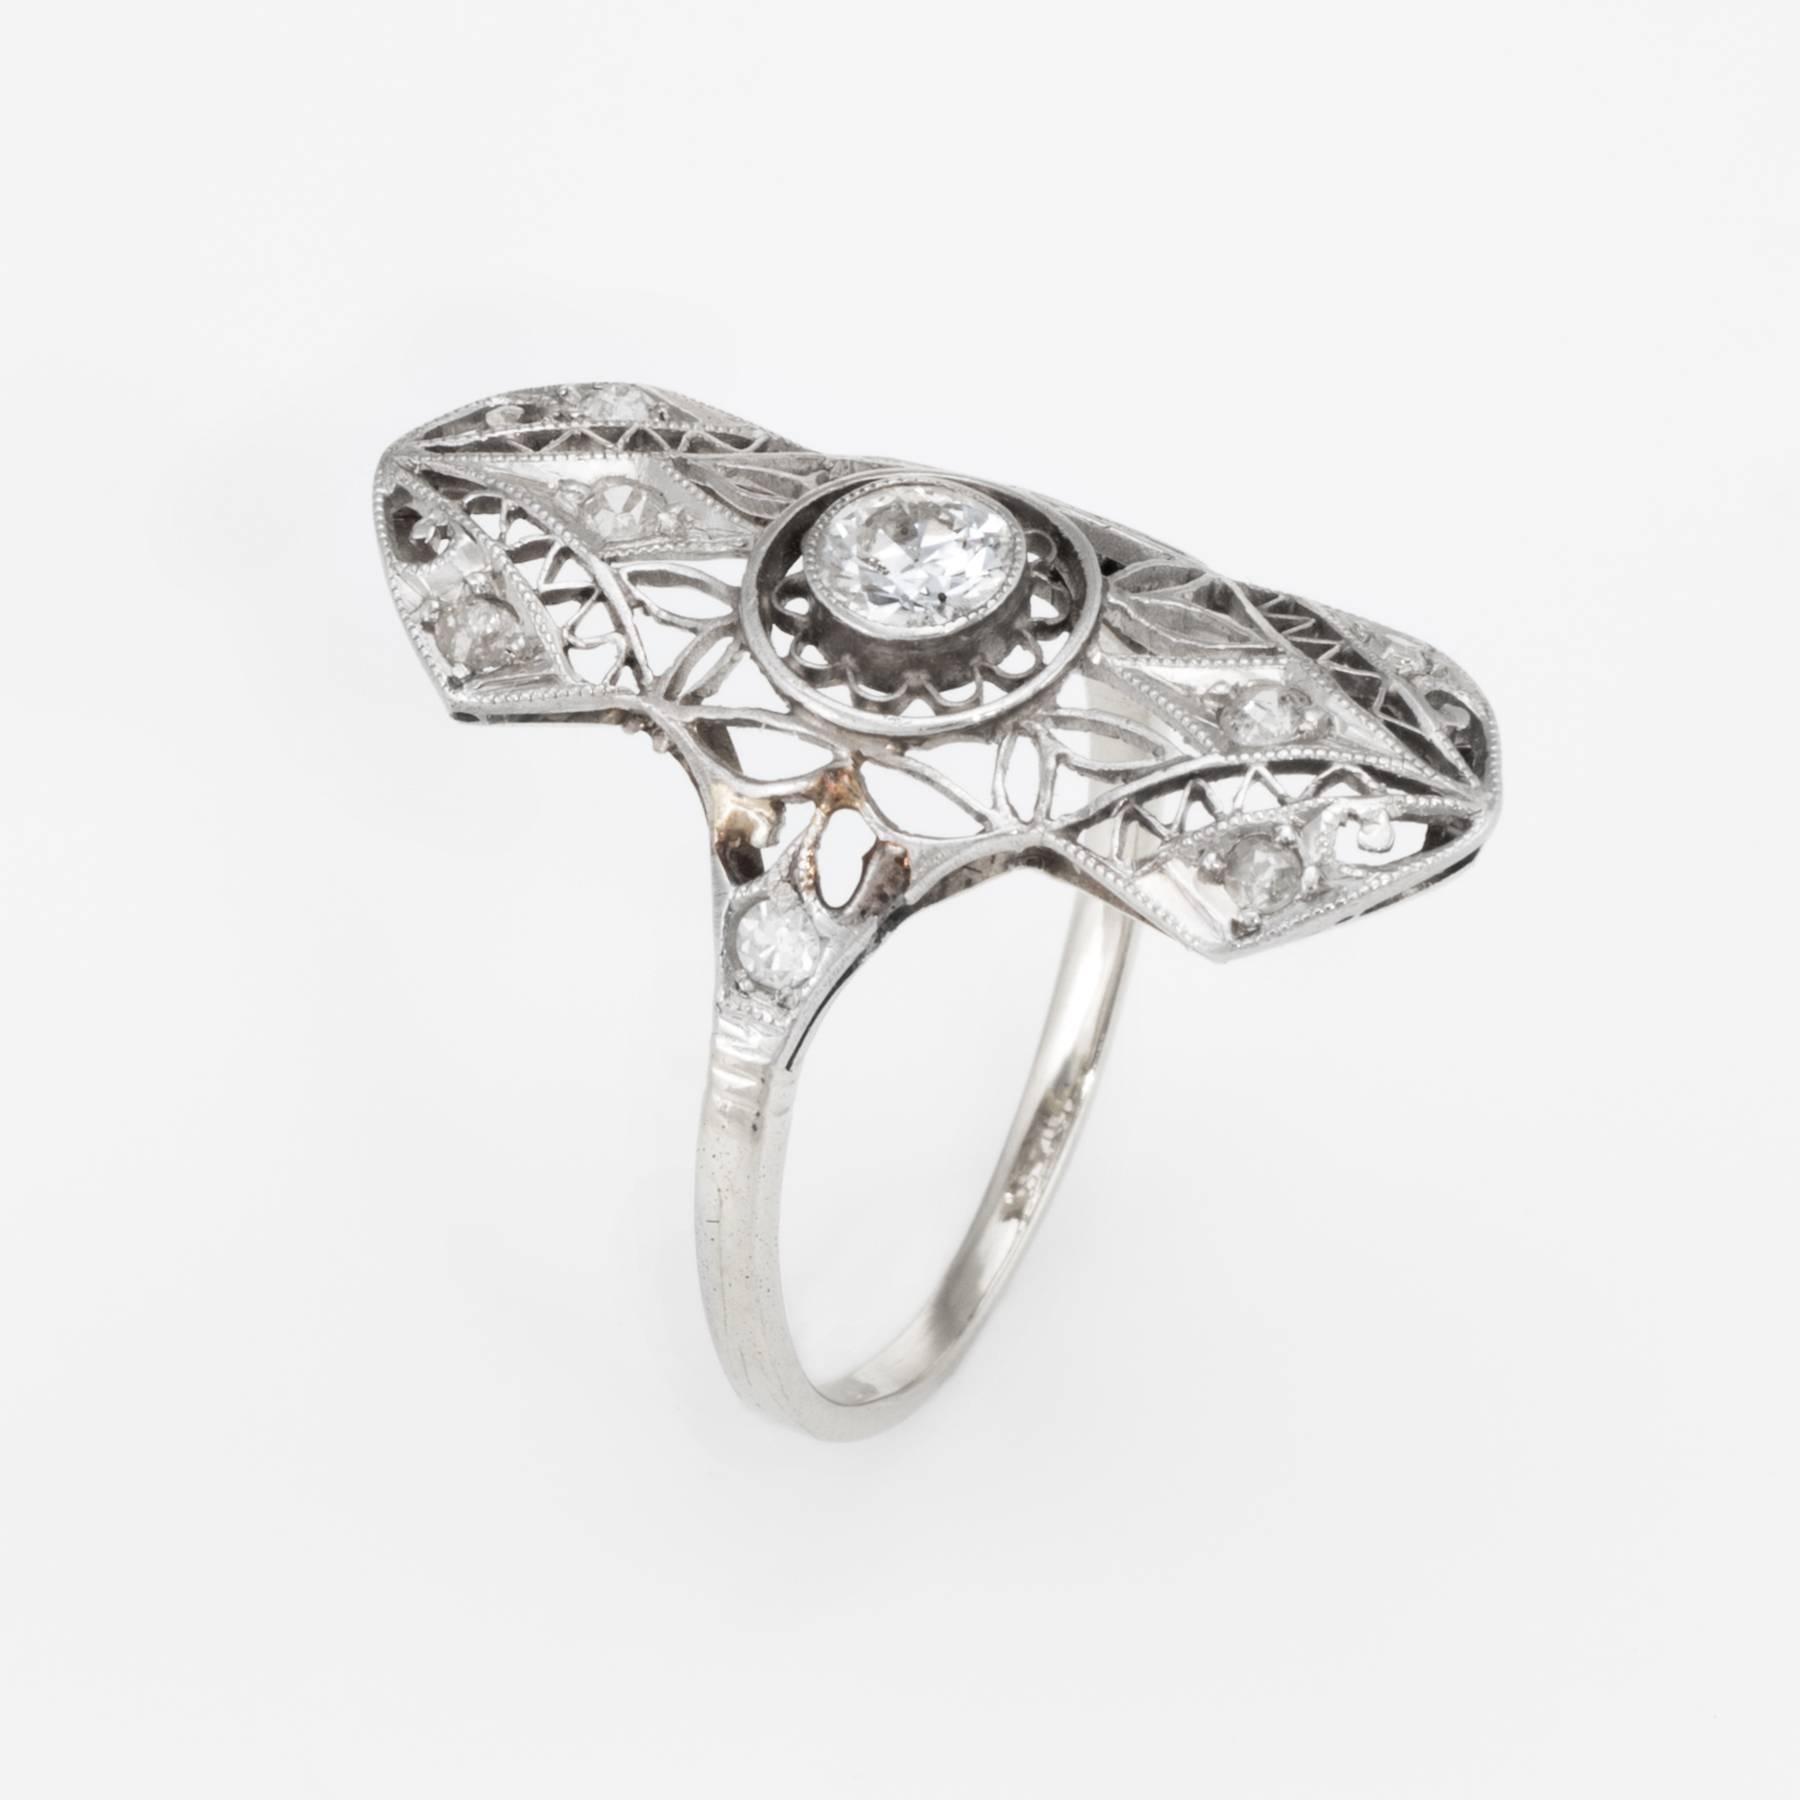 Finely detailed vintage Art Deco era ring (circa 1920s to 1930s), crafted in 14 karat white gold. 

Centrally mounted estimated 0.20 carat old European cut diamond is accented with 8 x estimated 0.02 carat old single cut diamonds. The total diamond